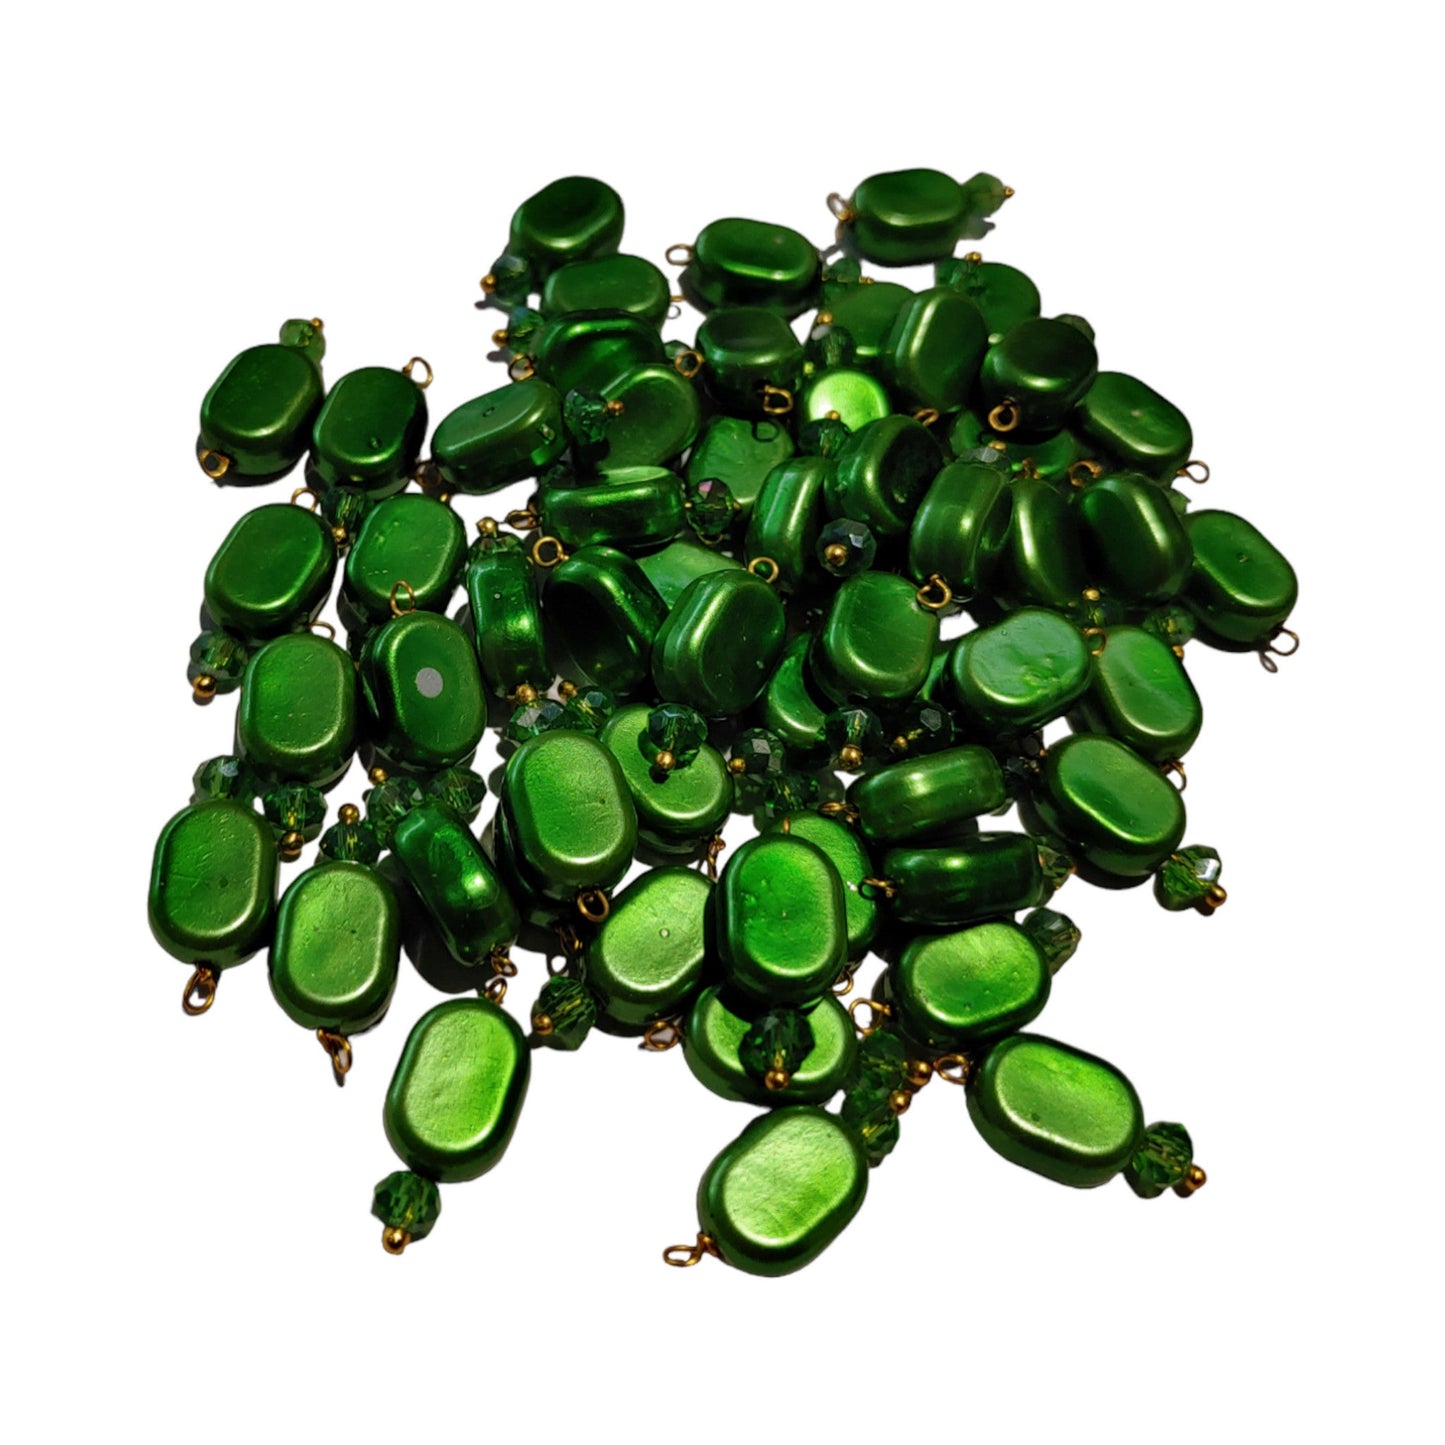 Indian Petals 100Pcs Colored Plastic Bead with Crystal Ball Drop for Craft Décor or Jewelry Making, 8x12mm, Dark Green